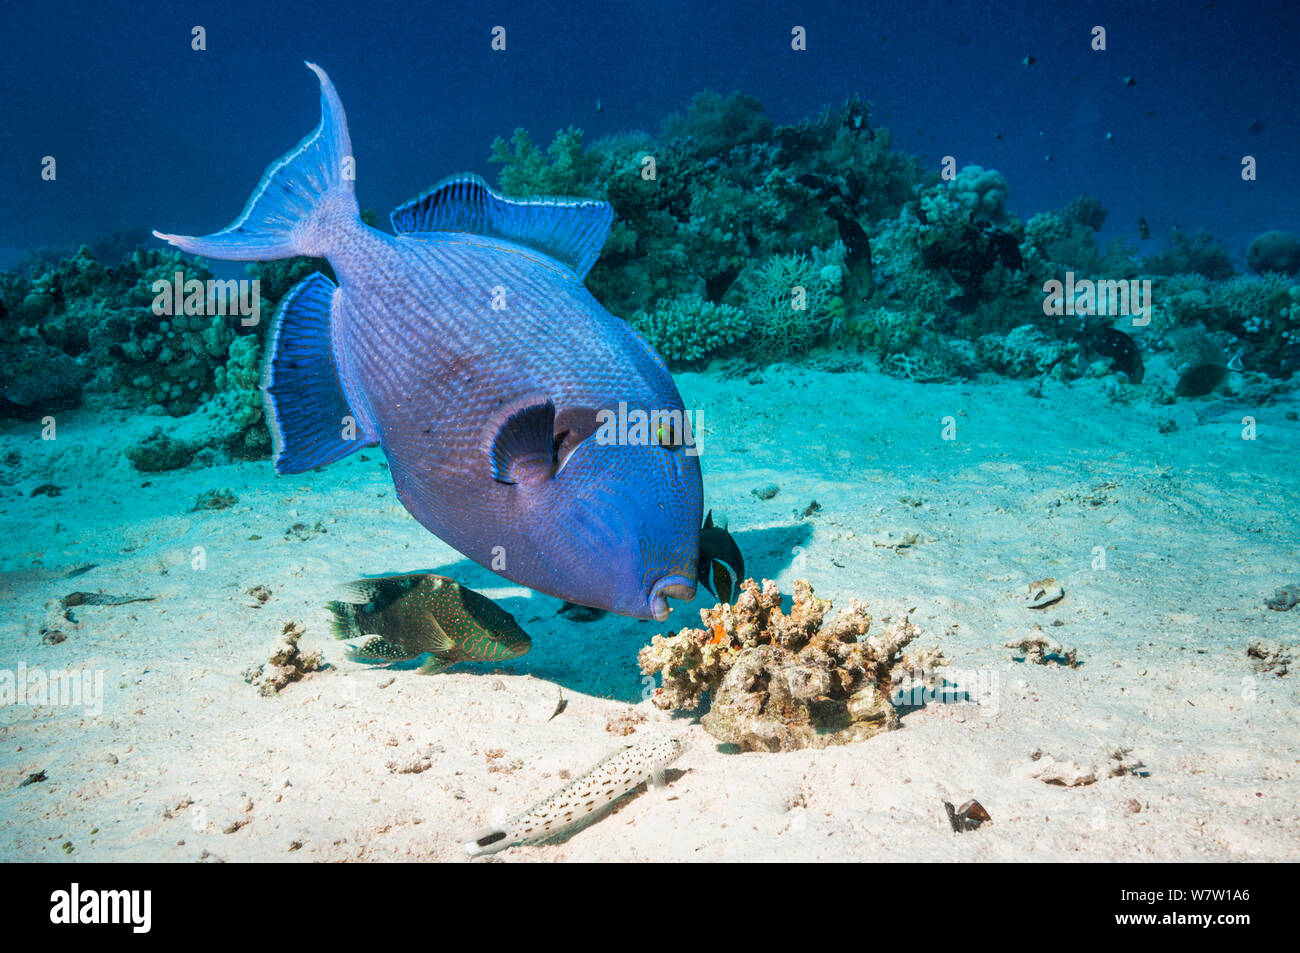 Blue triggerfish (Pseudobalistes fuscus) grubbing for food with Abudjubbe splendor wrasse (Cheilinus abudjubbe), (a Red Sea endemic), and a Speckled sandperch (Parapercis hexophtalma) keeping a close watch for any escaping prey.  Egypt, Red Sea. Stock Photo